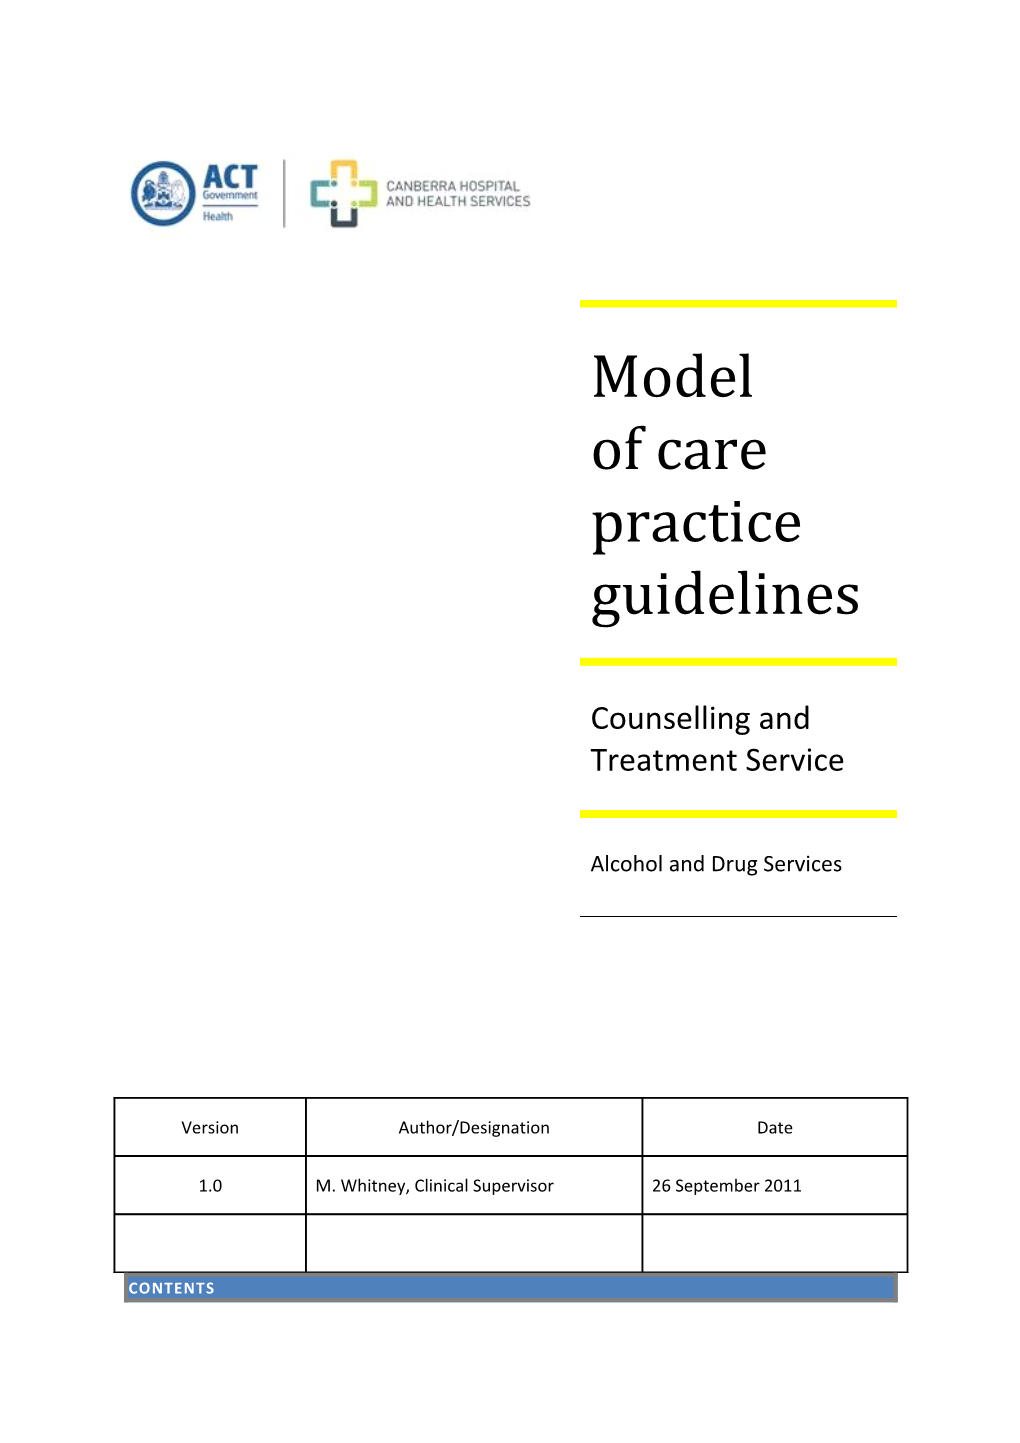 ADS Counselling and Treatment Team - Model of Care Practice Guidelines